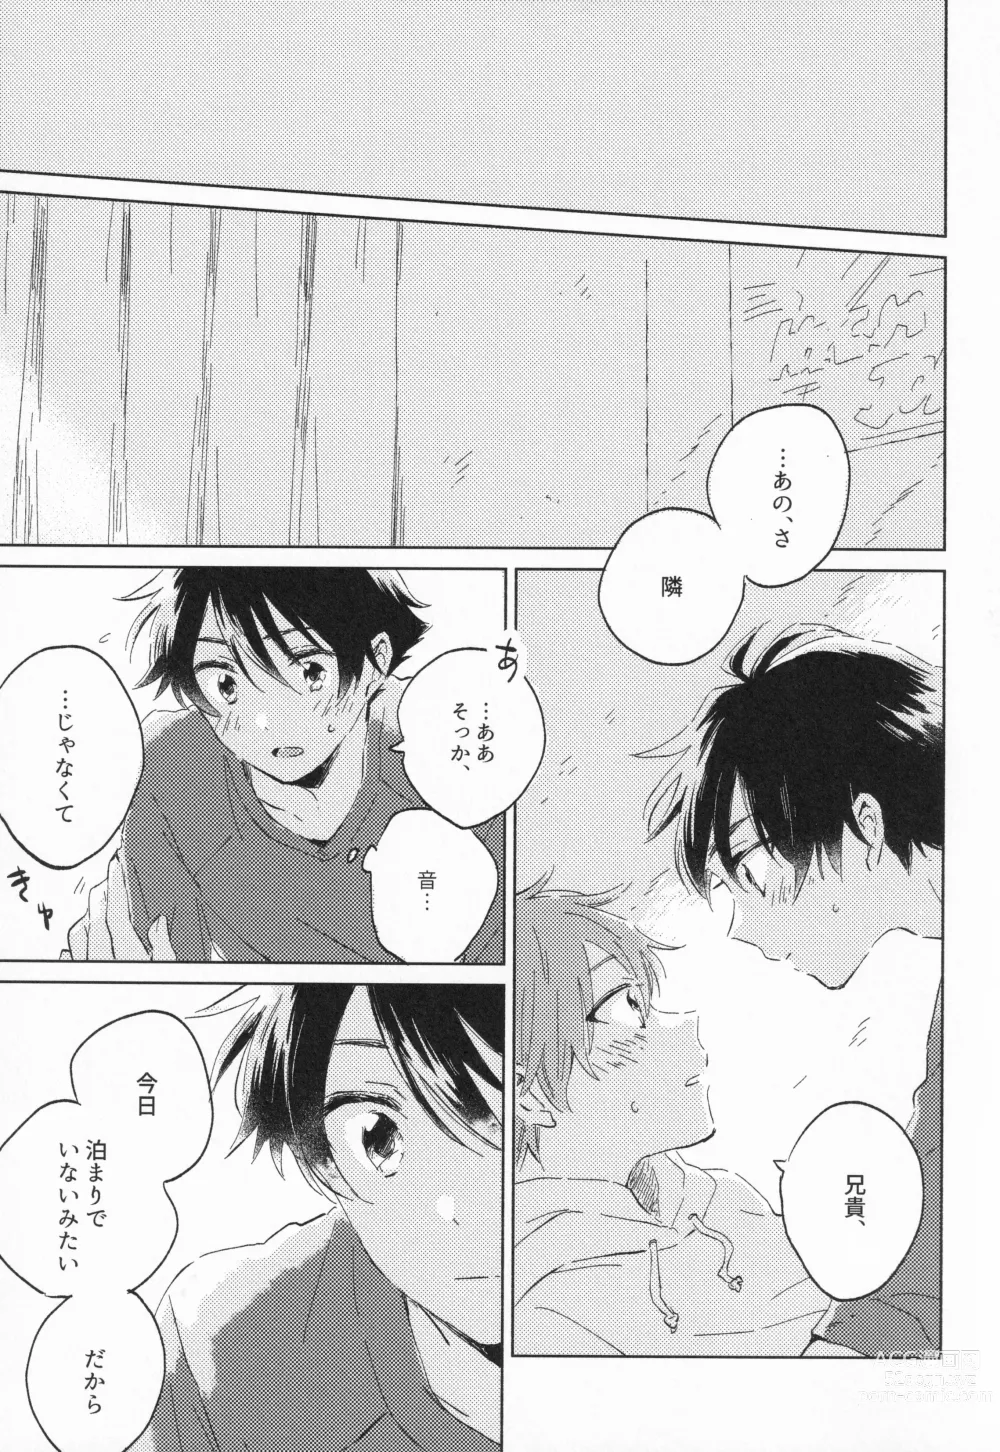 Page 38 of doujinshi 21-ji ni Machiawase - On the stroke of 9pm, the spell will be broken